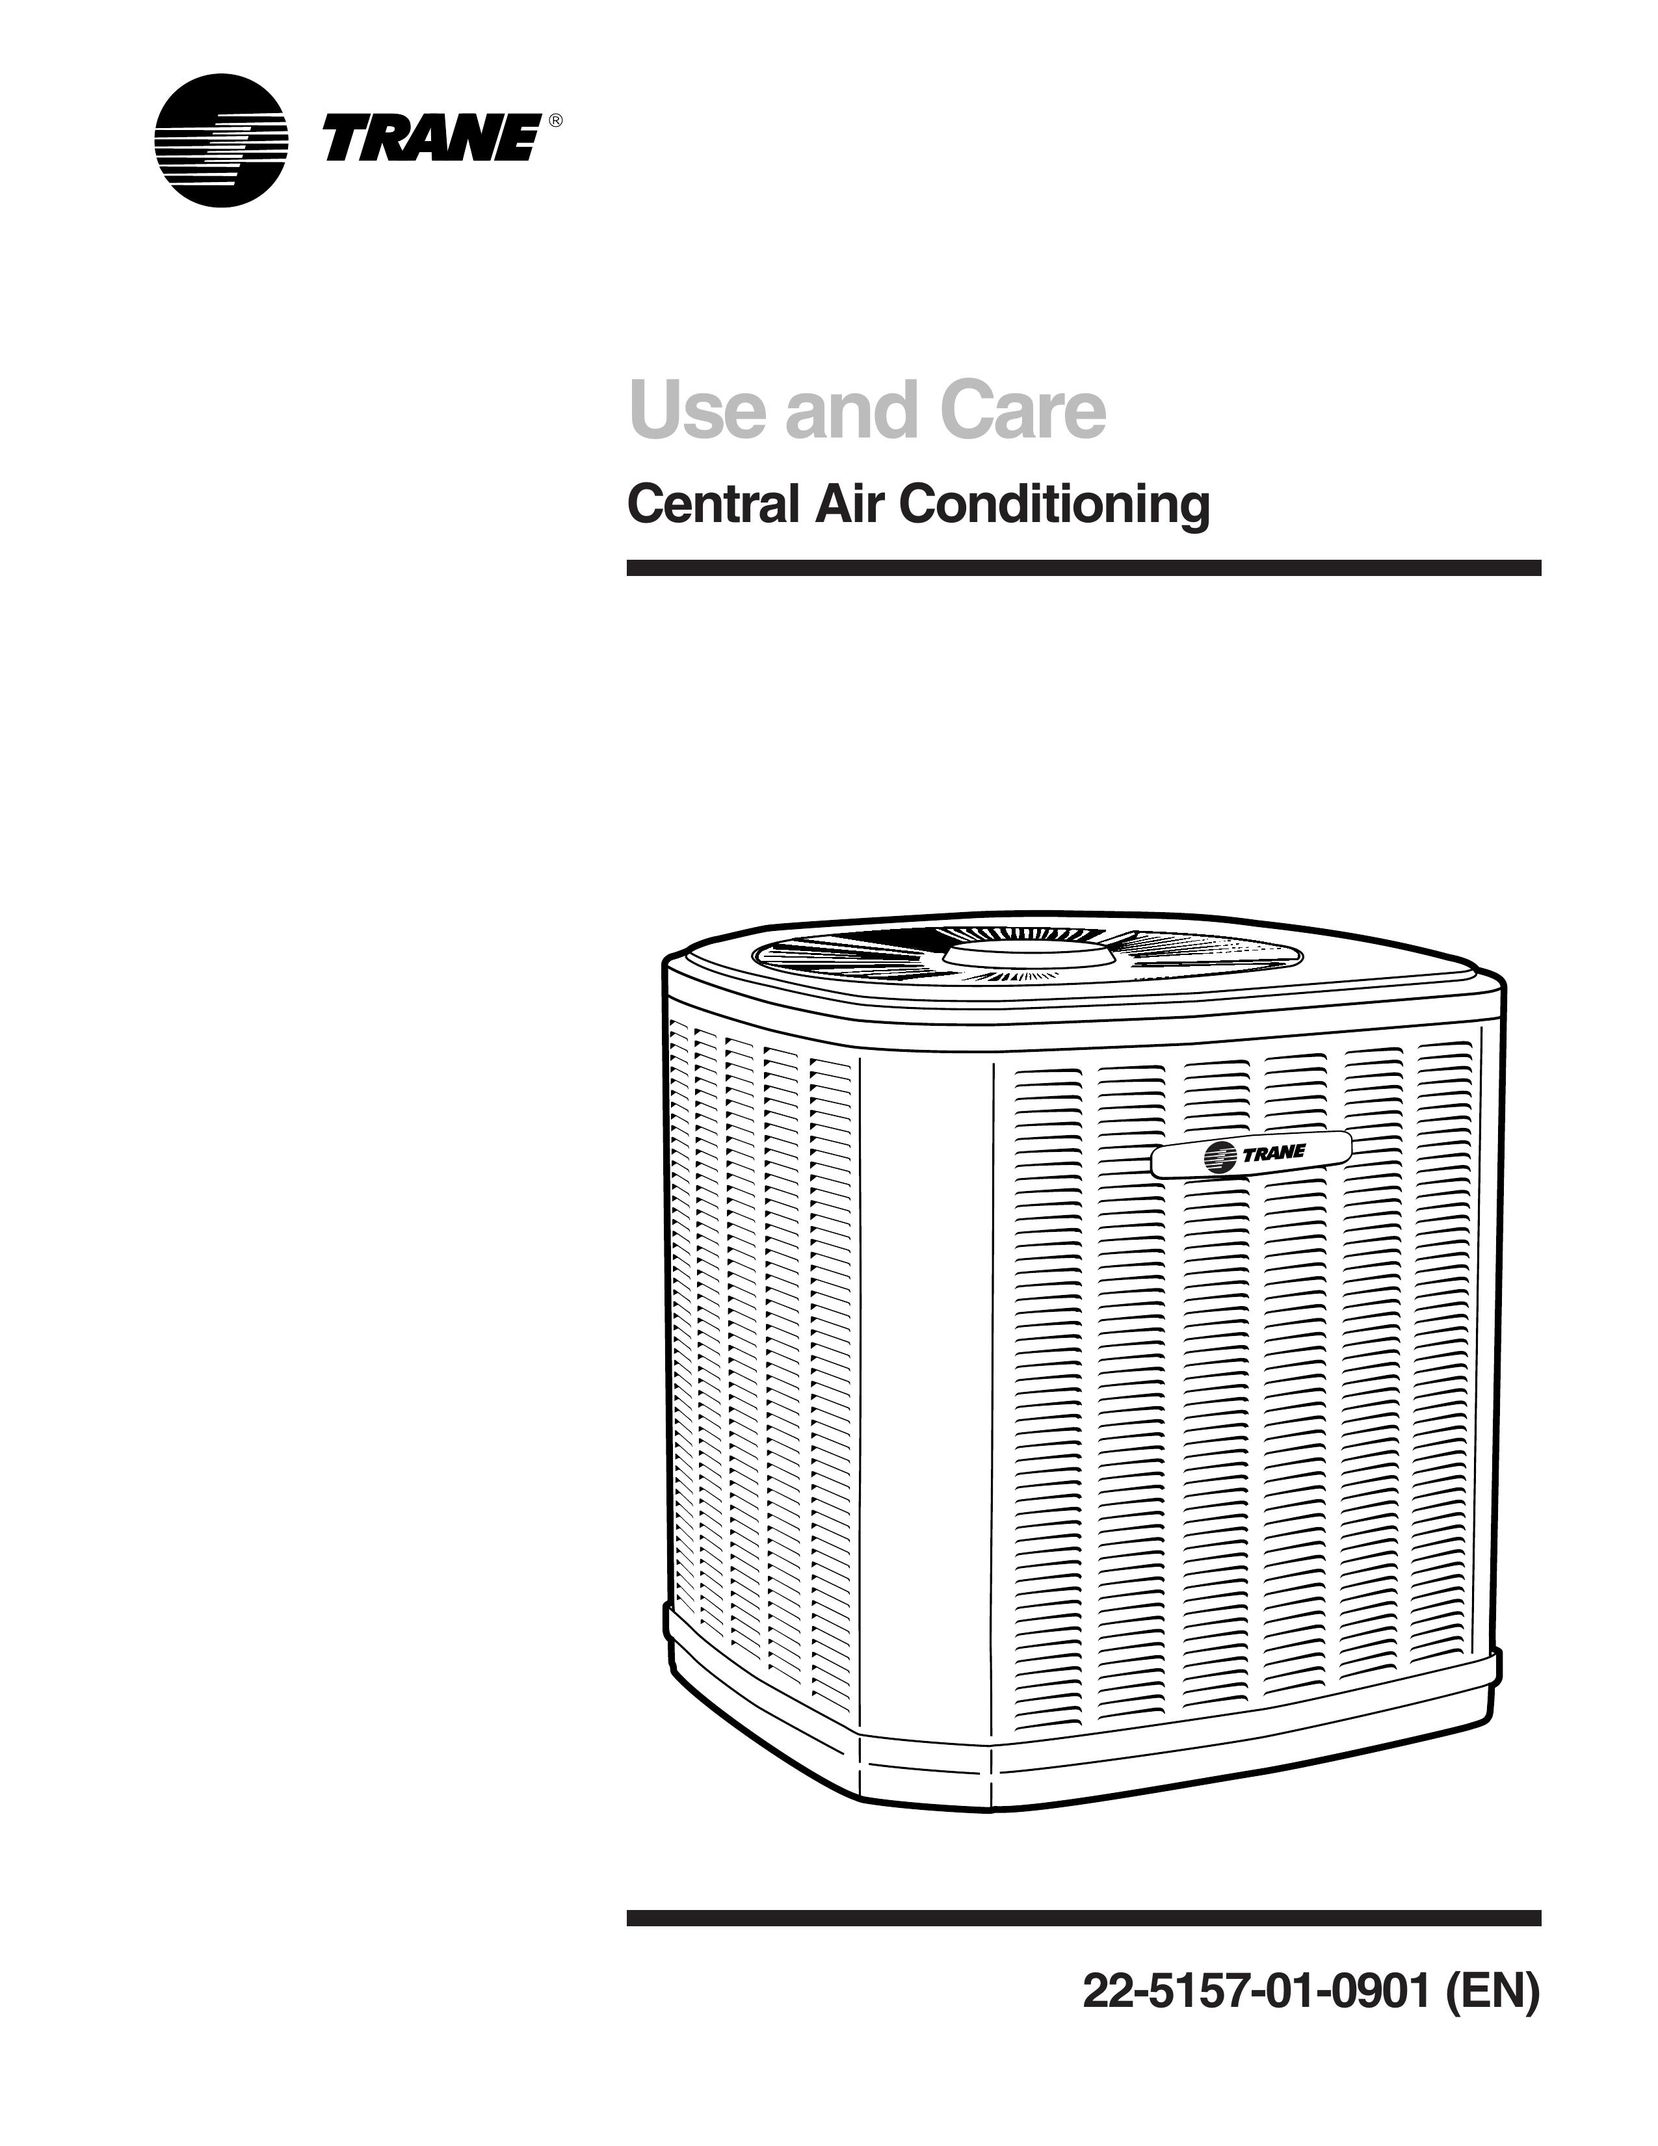 Trane Central Air Conditioning Air Conditioner User Manual